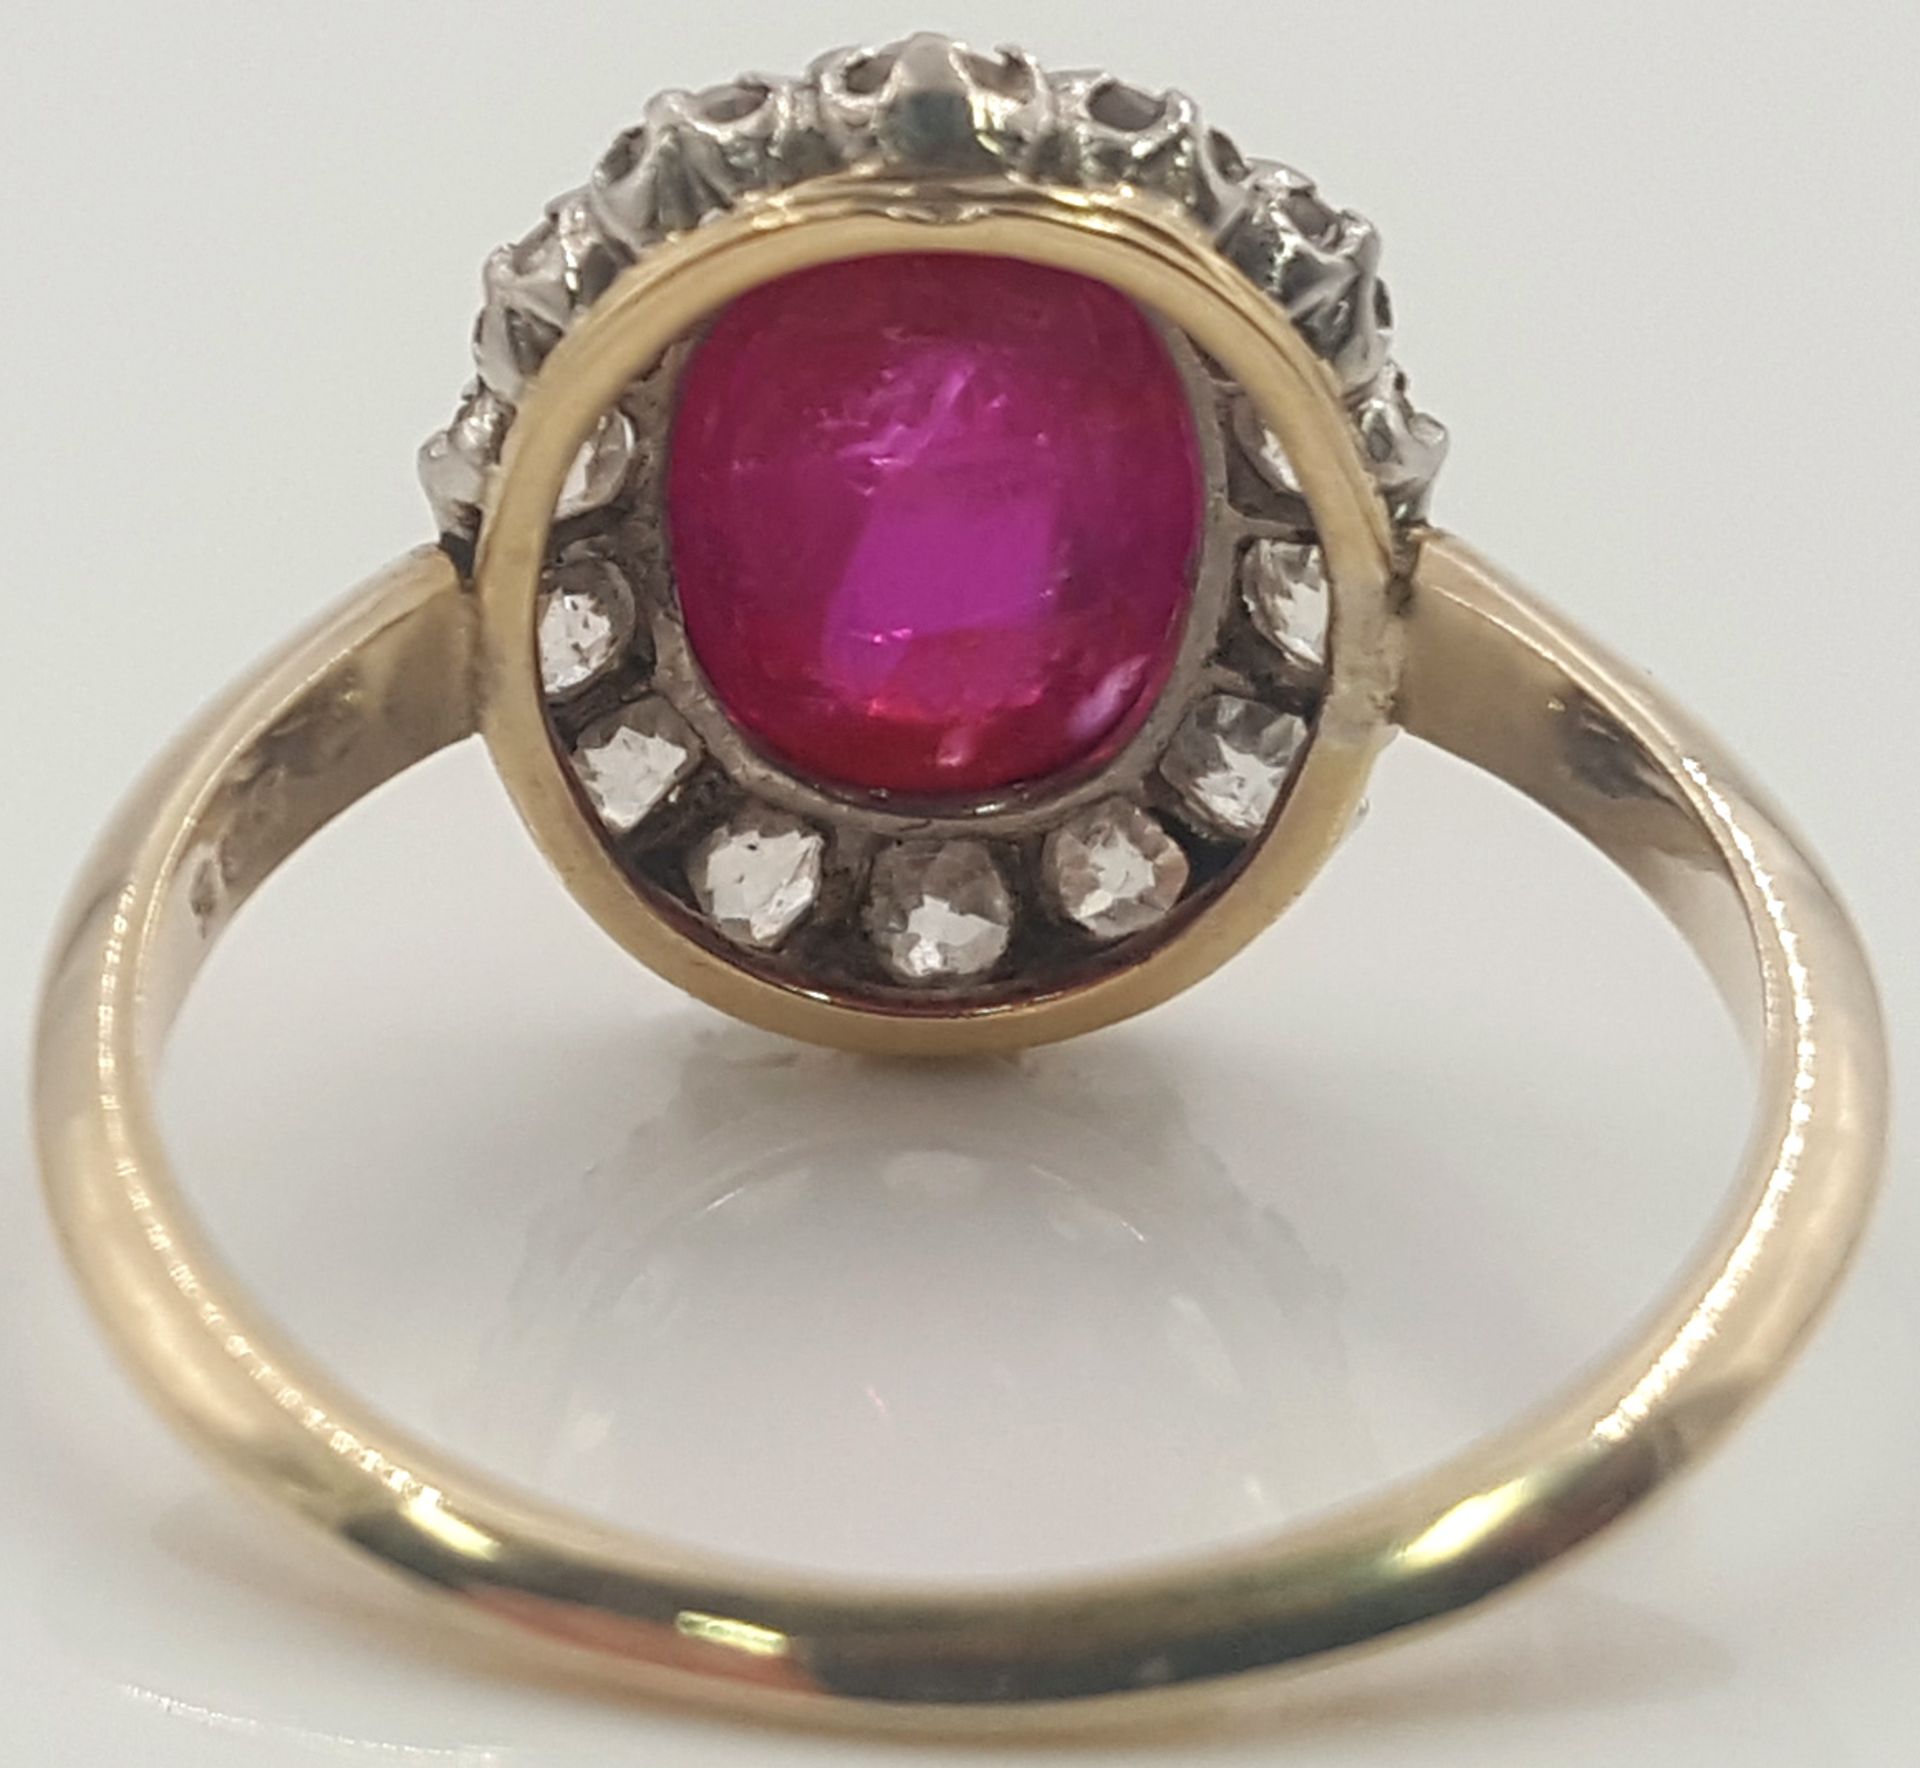 Set. Ring with ruby (Burma) and 14 diamonds. - Image 5 of 13